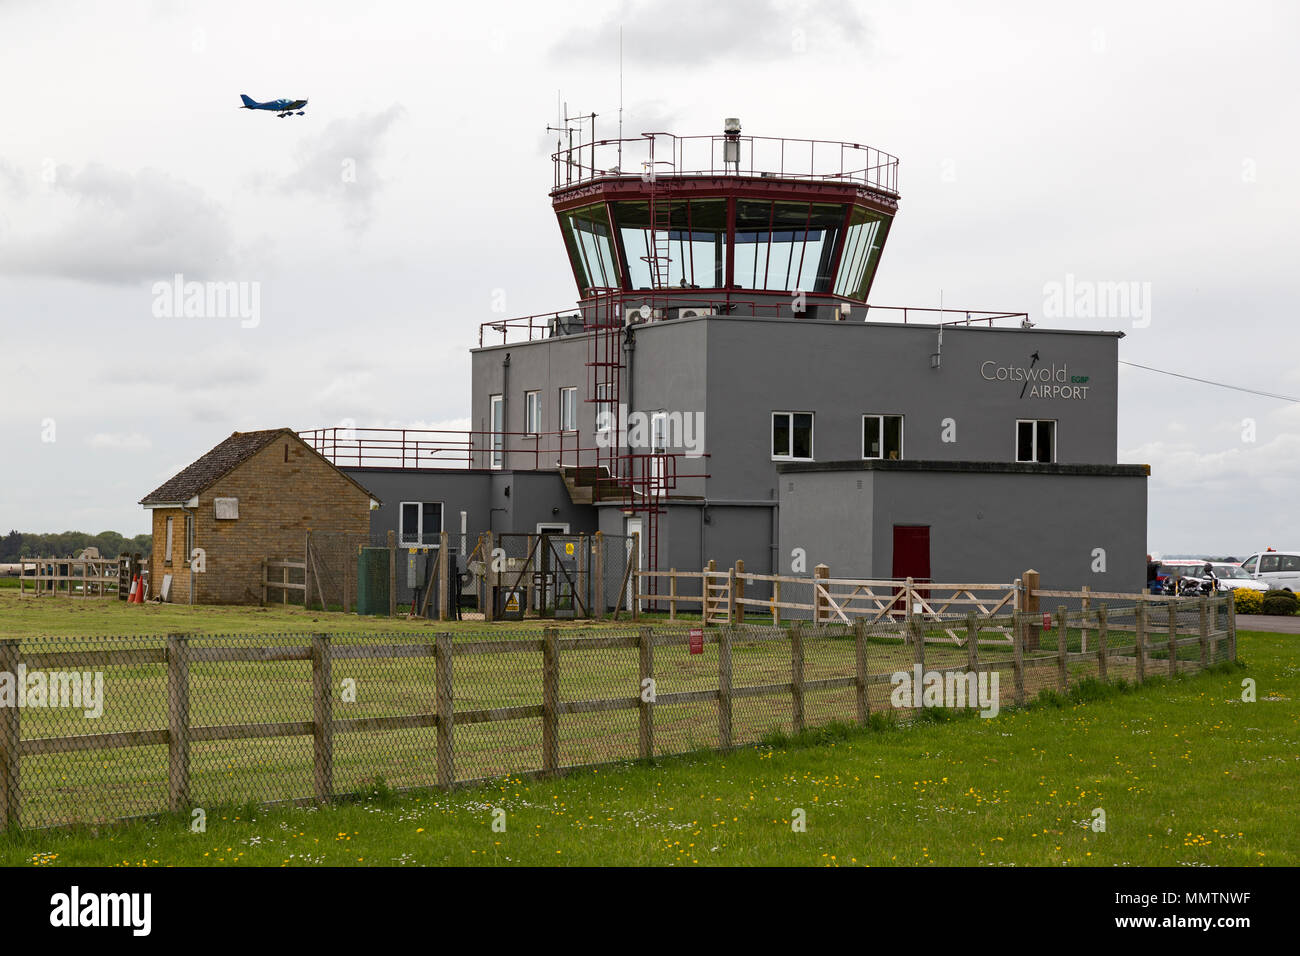 The control tower at Cotswold Kemble Airport in Gloucestershire, England. Stock Photo